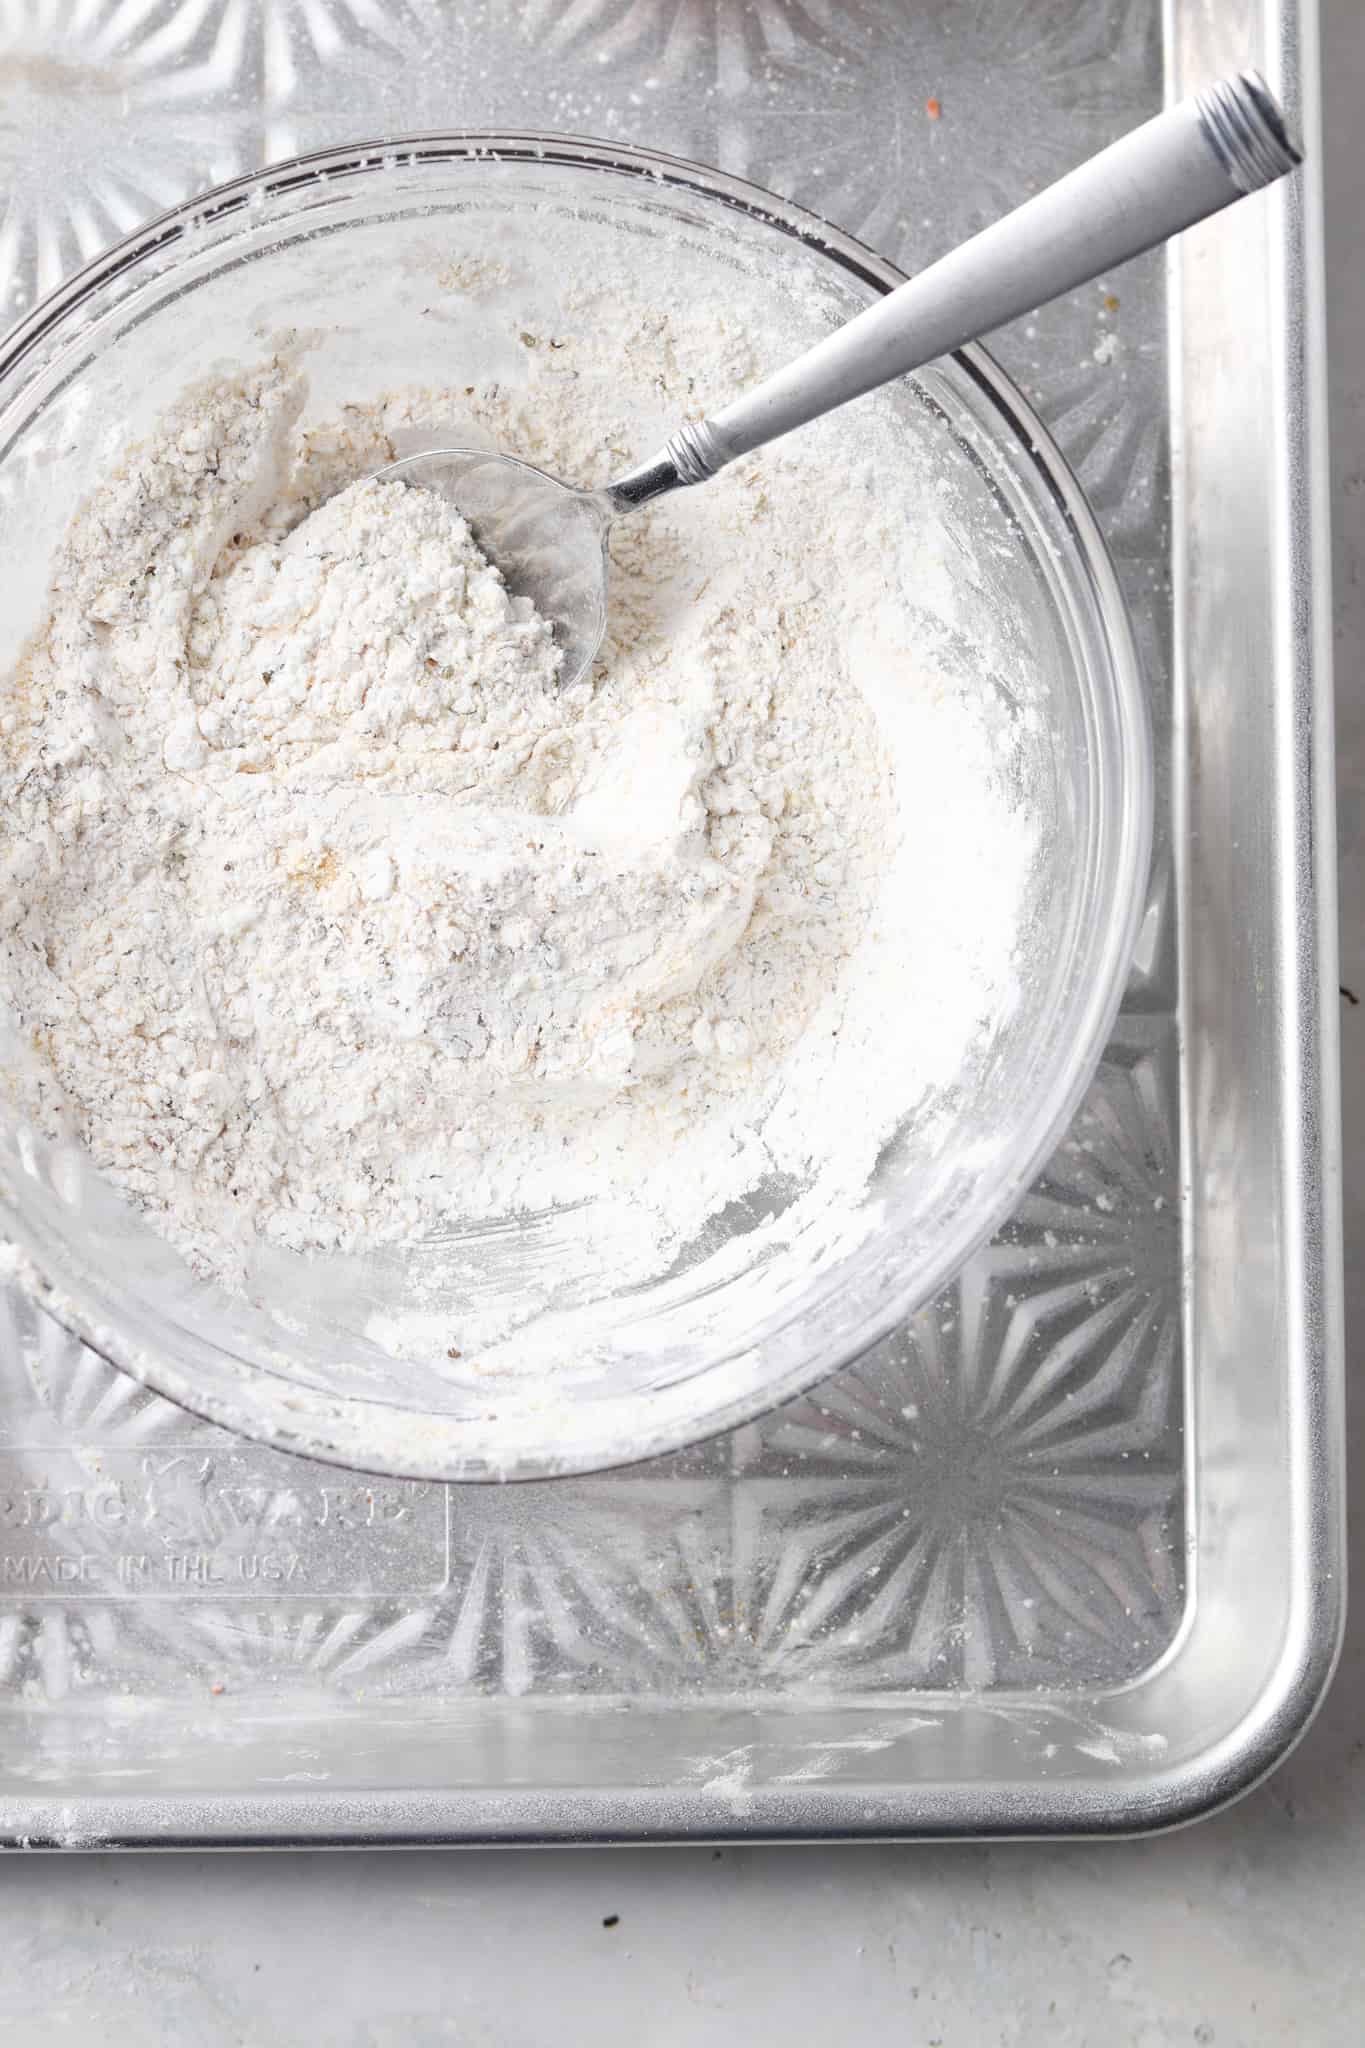 Arrowroot powder, garlic powder, onion powder, dried oregano, dried basil, and sea salt all mixed in a clear mixing bowl on a silver backing sheet with a silver spoon in the bowl.